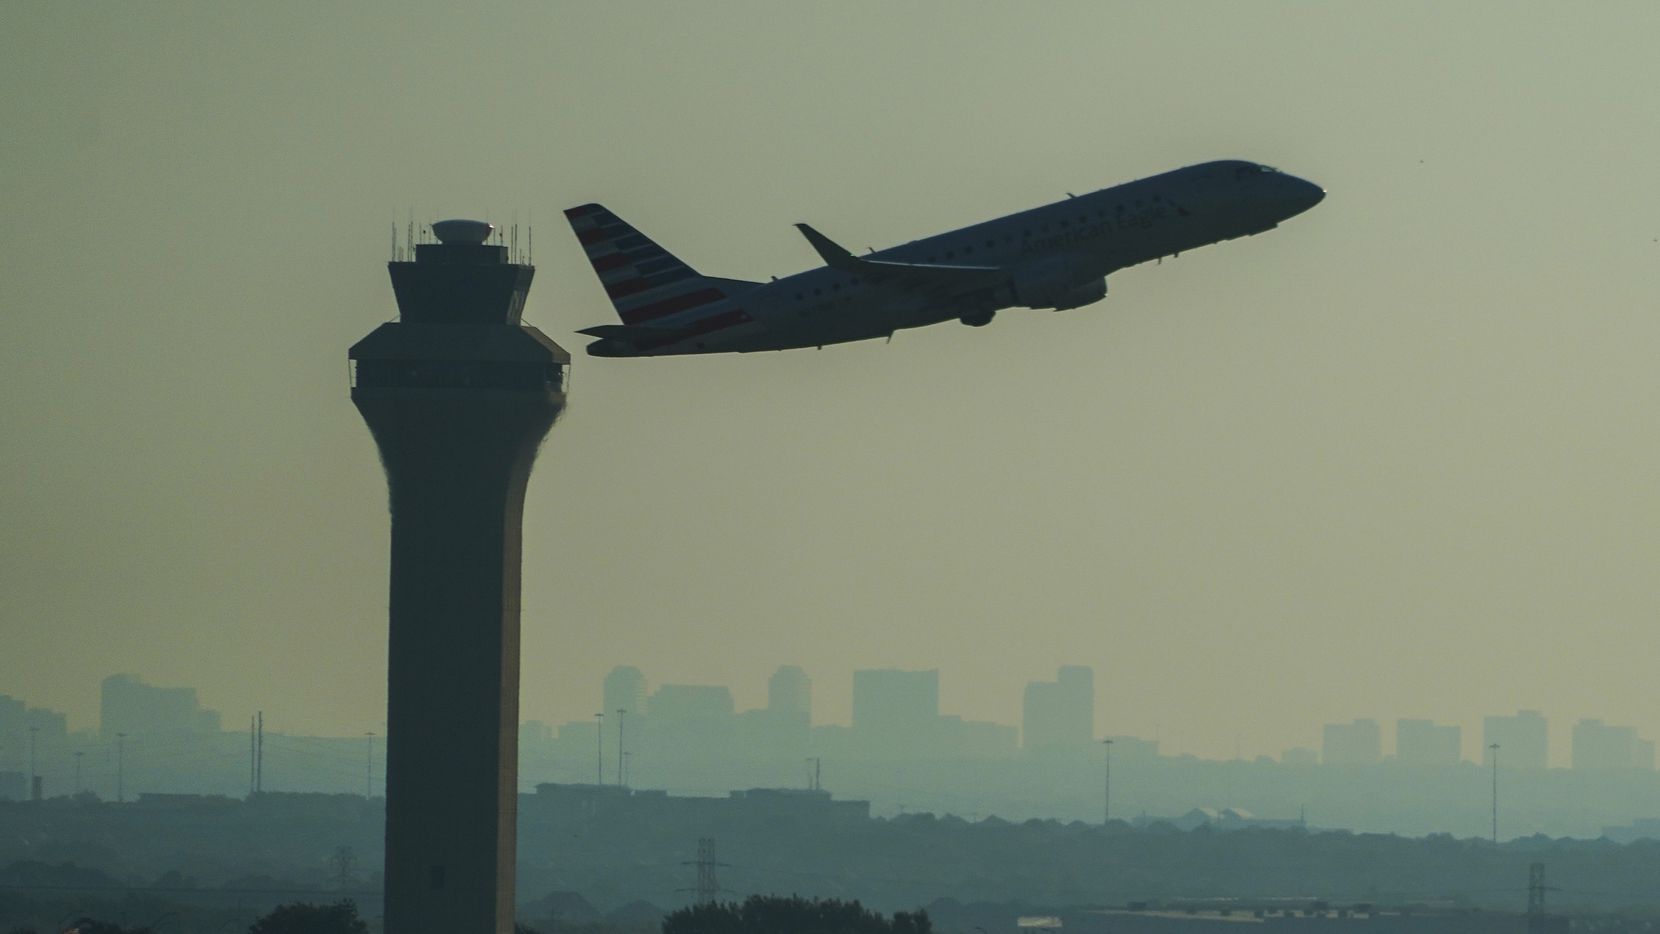 An American Eagle plane takes off at DFW Airport on Saturday, Sept. 24, 2022.